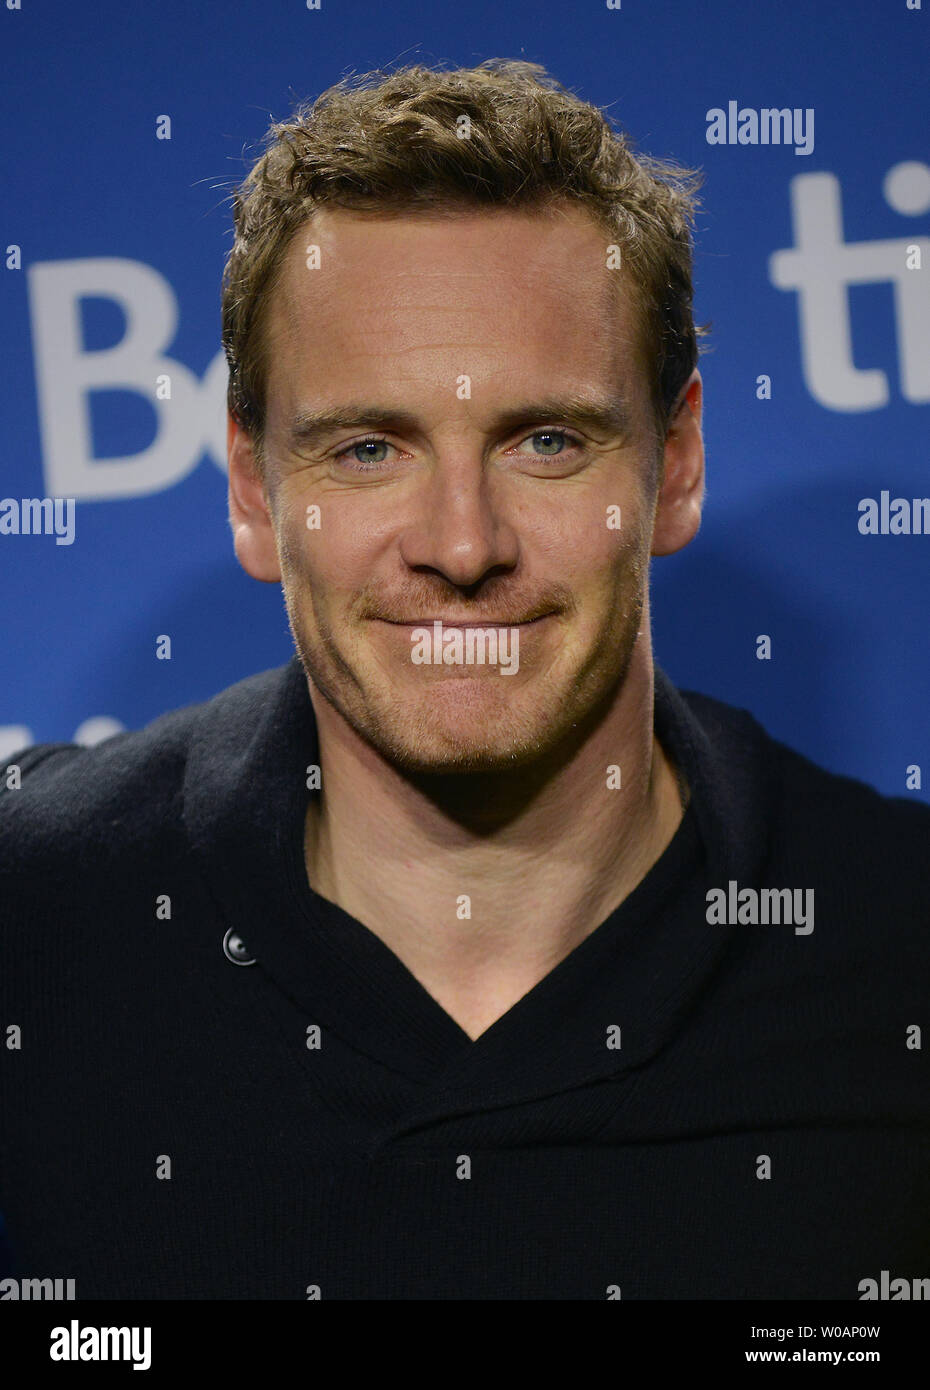 Michael Fassbender attends the photo call for '12 Years A Slave' at the  Bell Lightbox during the Toronto International Film Festival in Toronto,  Canada on September 7, 2013. UPI/Christine Chew Stock Photo - Alamy